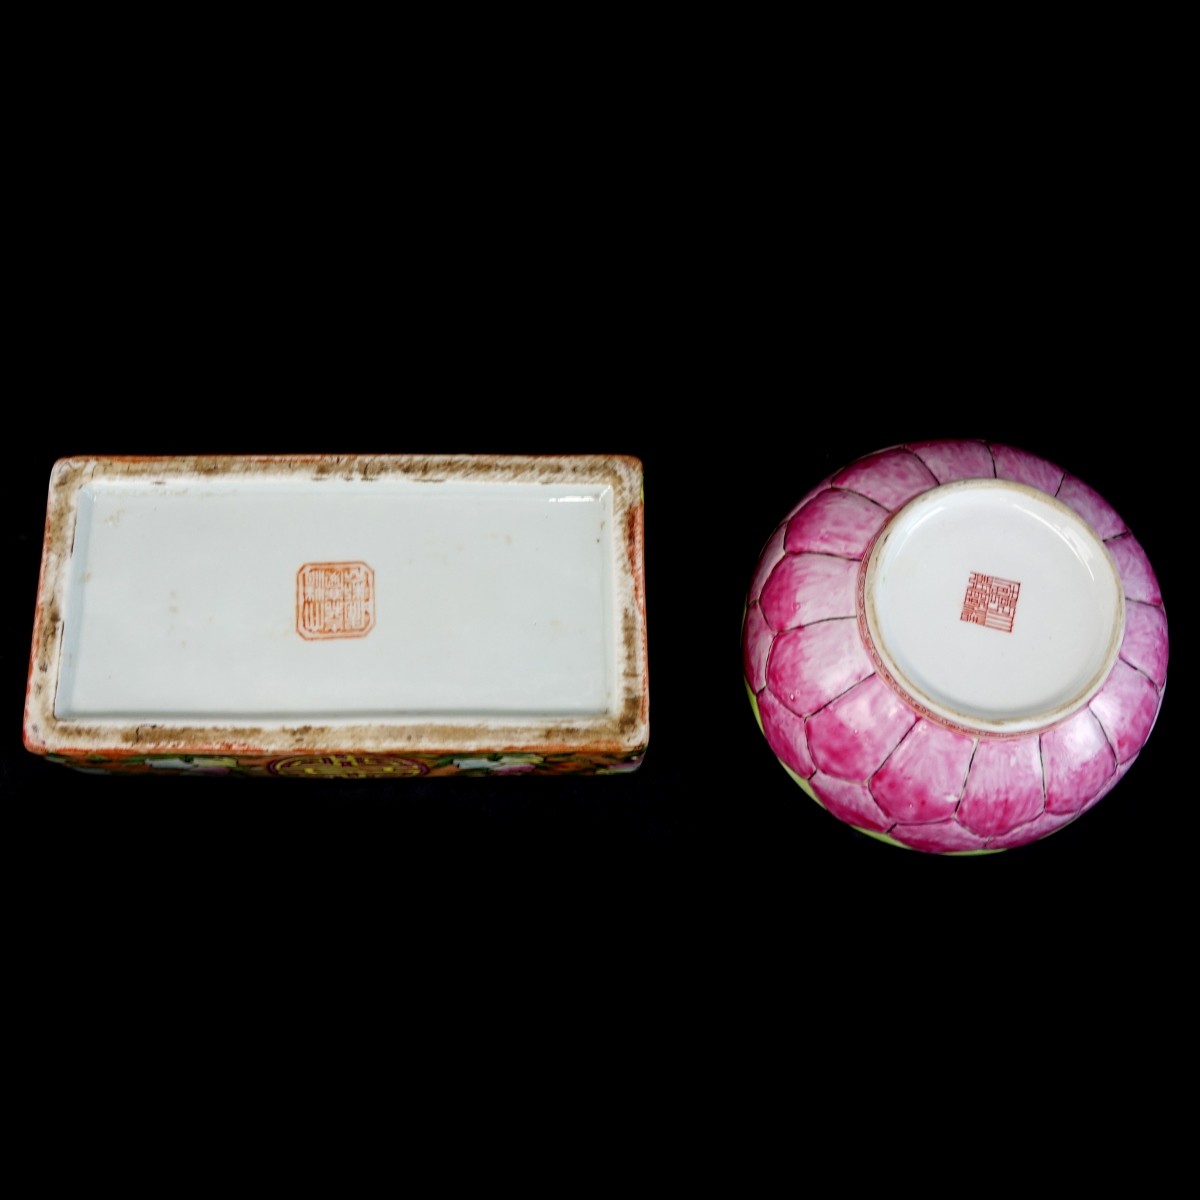 Chinese Lotus Covered Bowl and Chinese Box